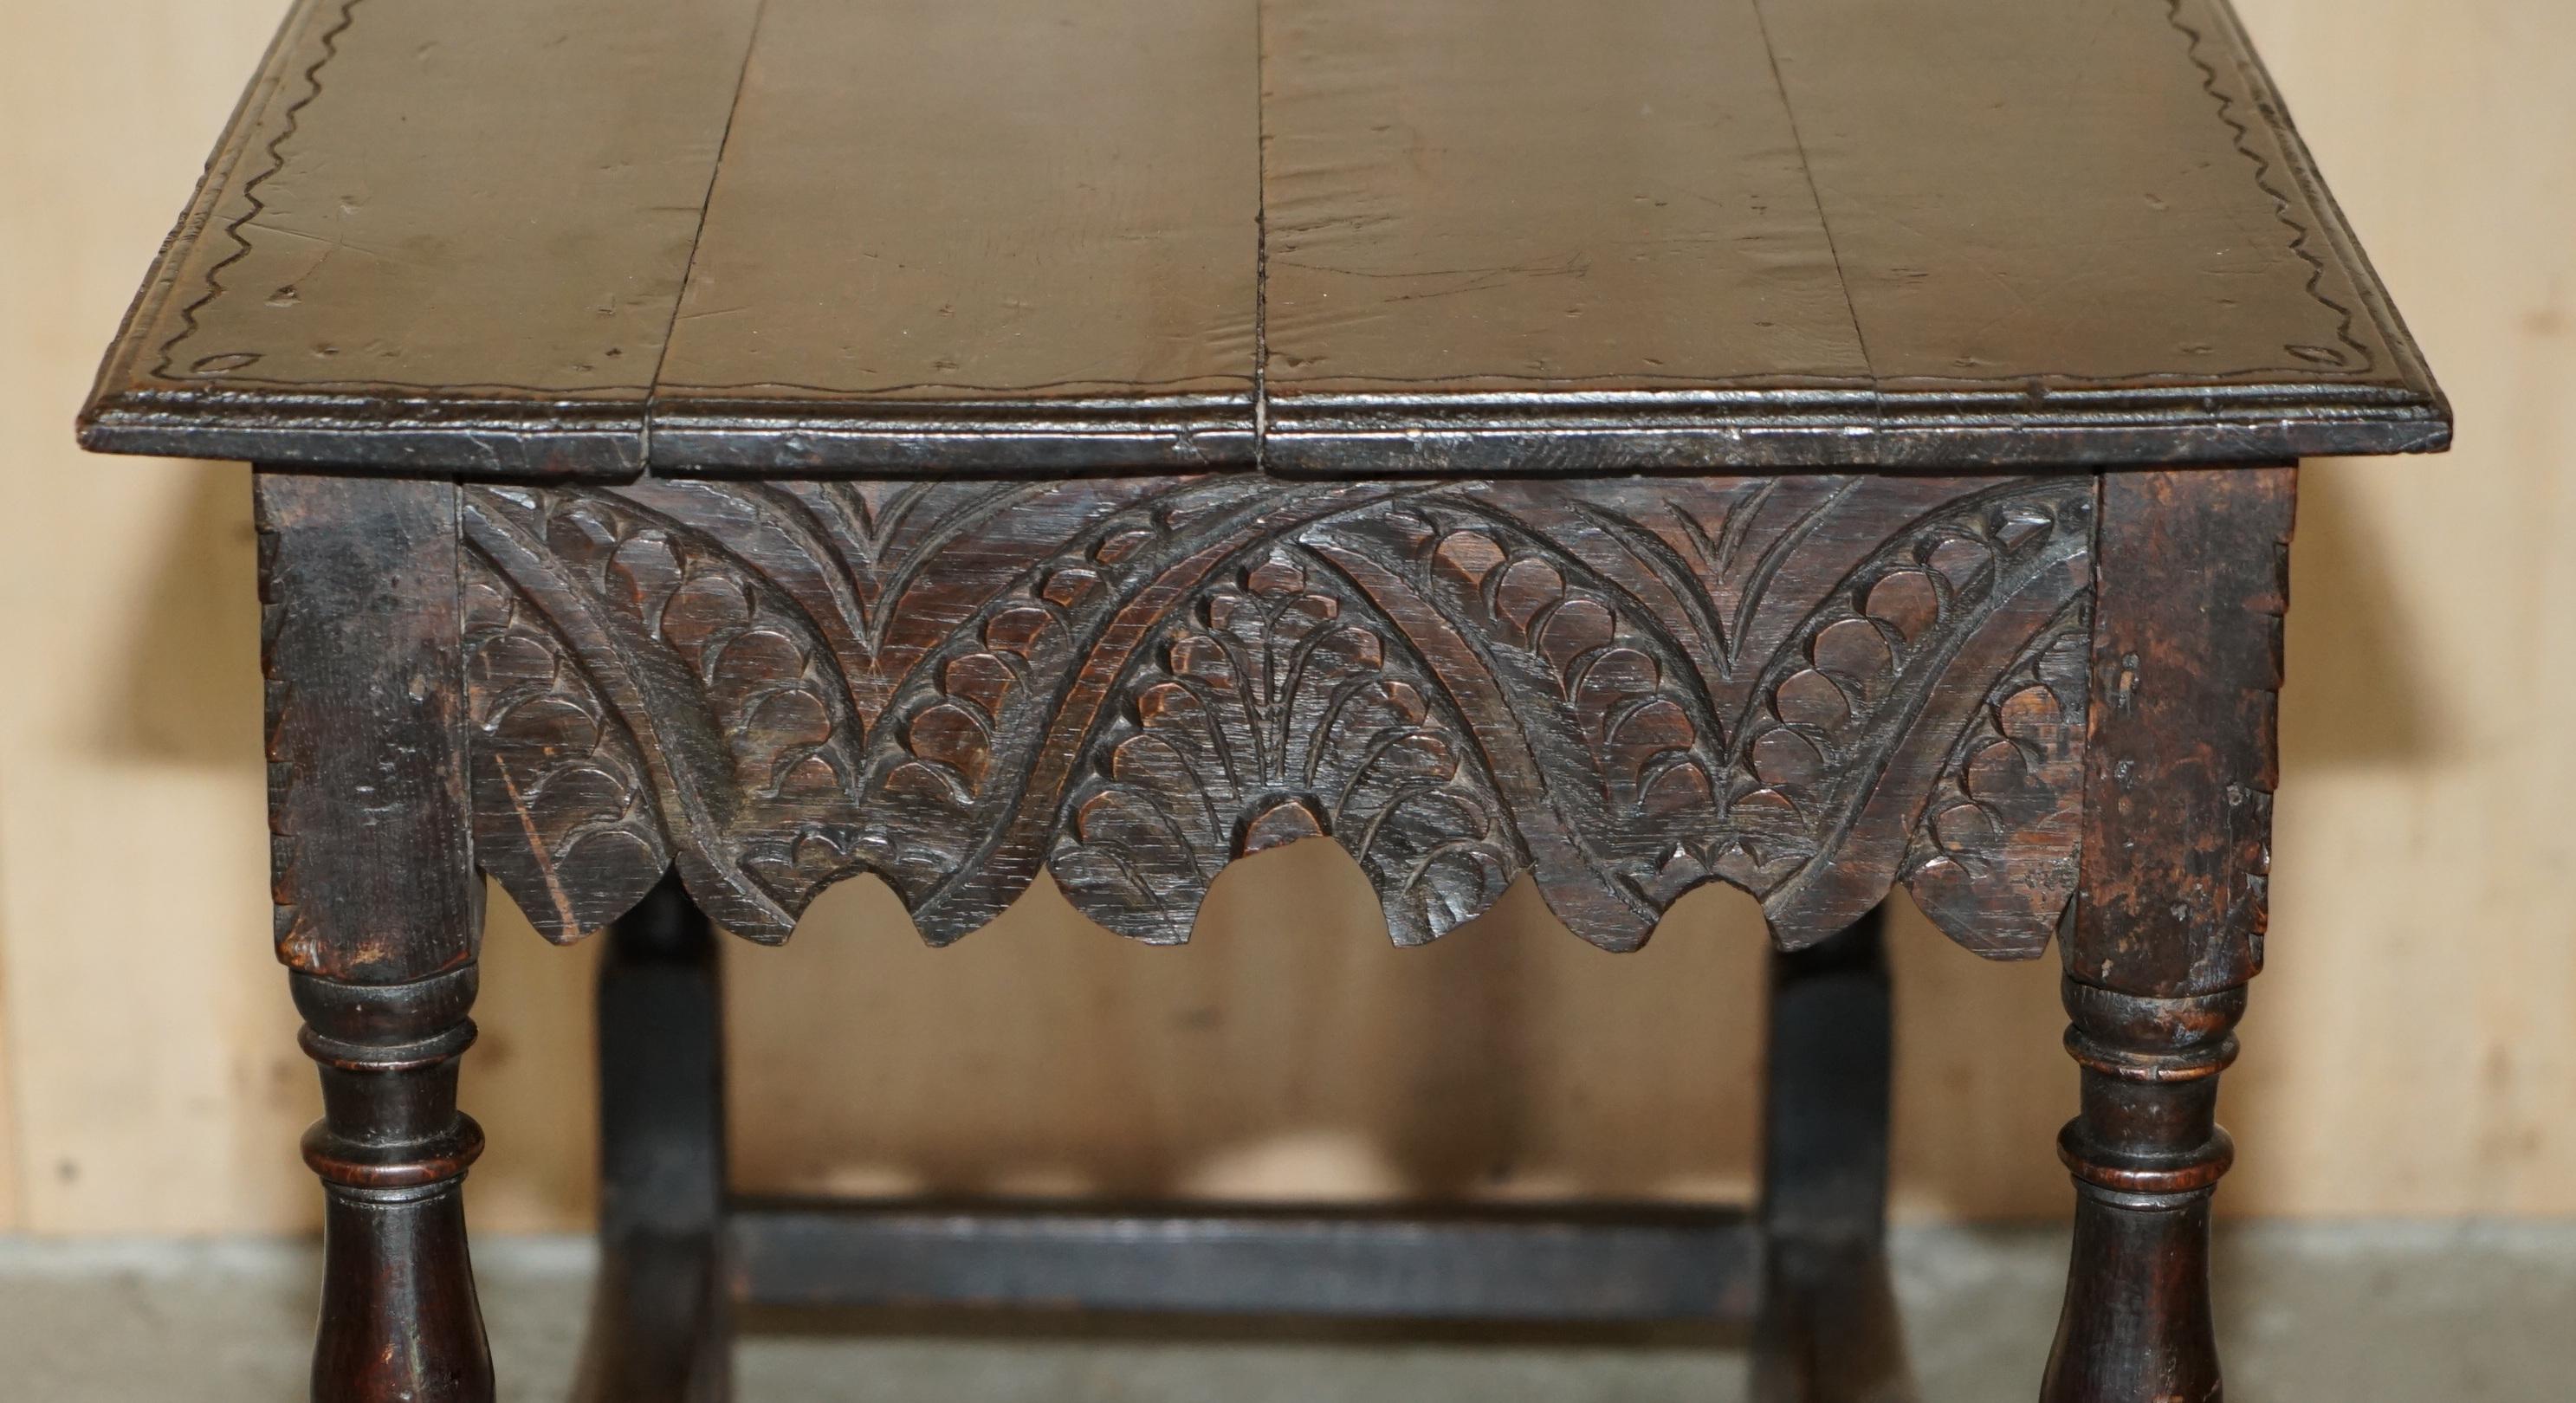 ANTIQUE ENGLISH 18TH CENTURY JACOBEAN CENTRE TABLE WiTH ORNATELY CARVED APRON For Sale 5